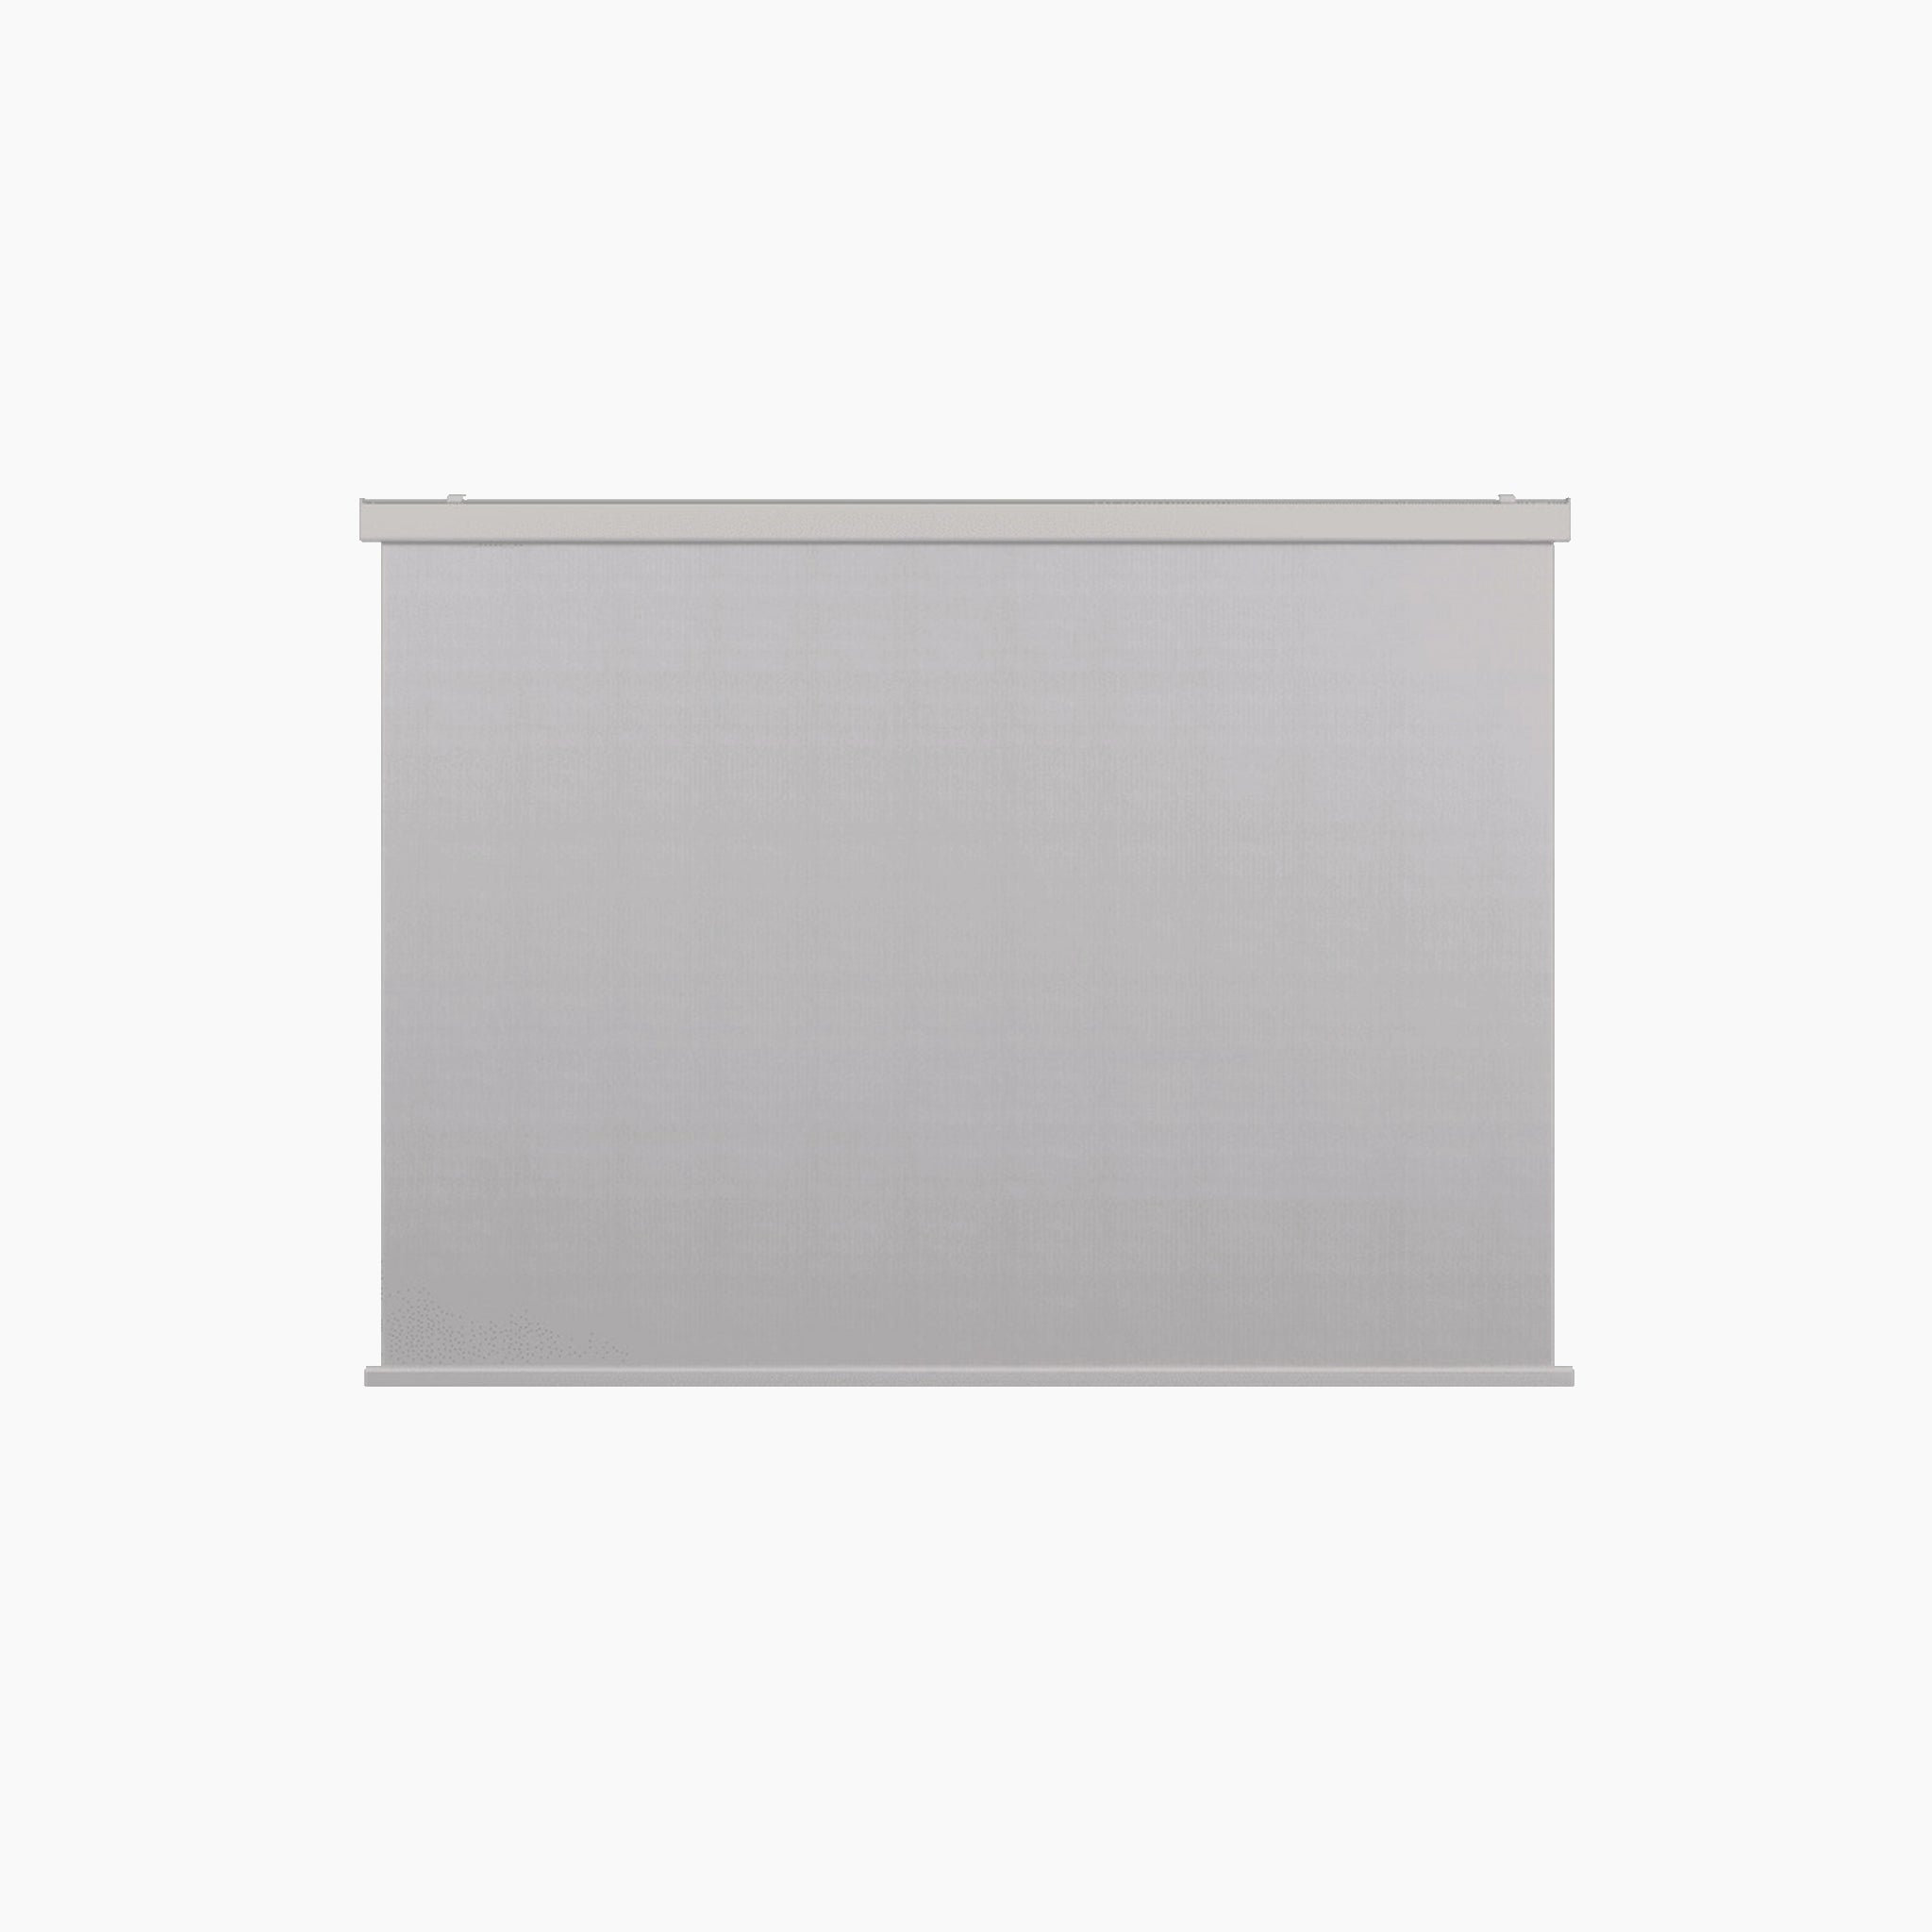 1x - 3M Integrated Manual Side Blind / White